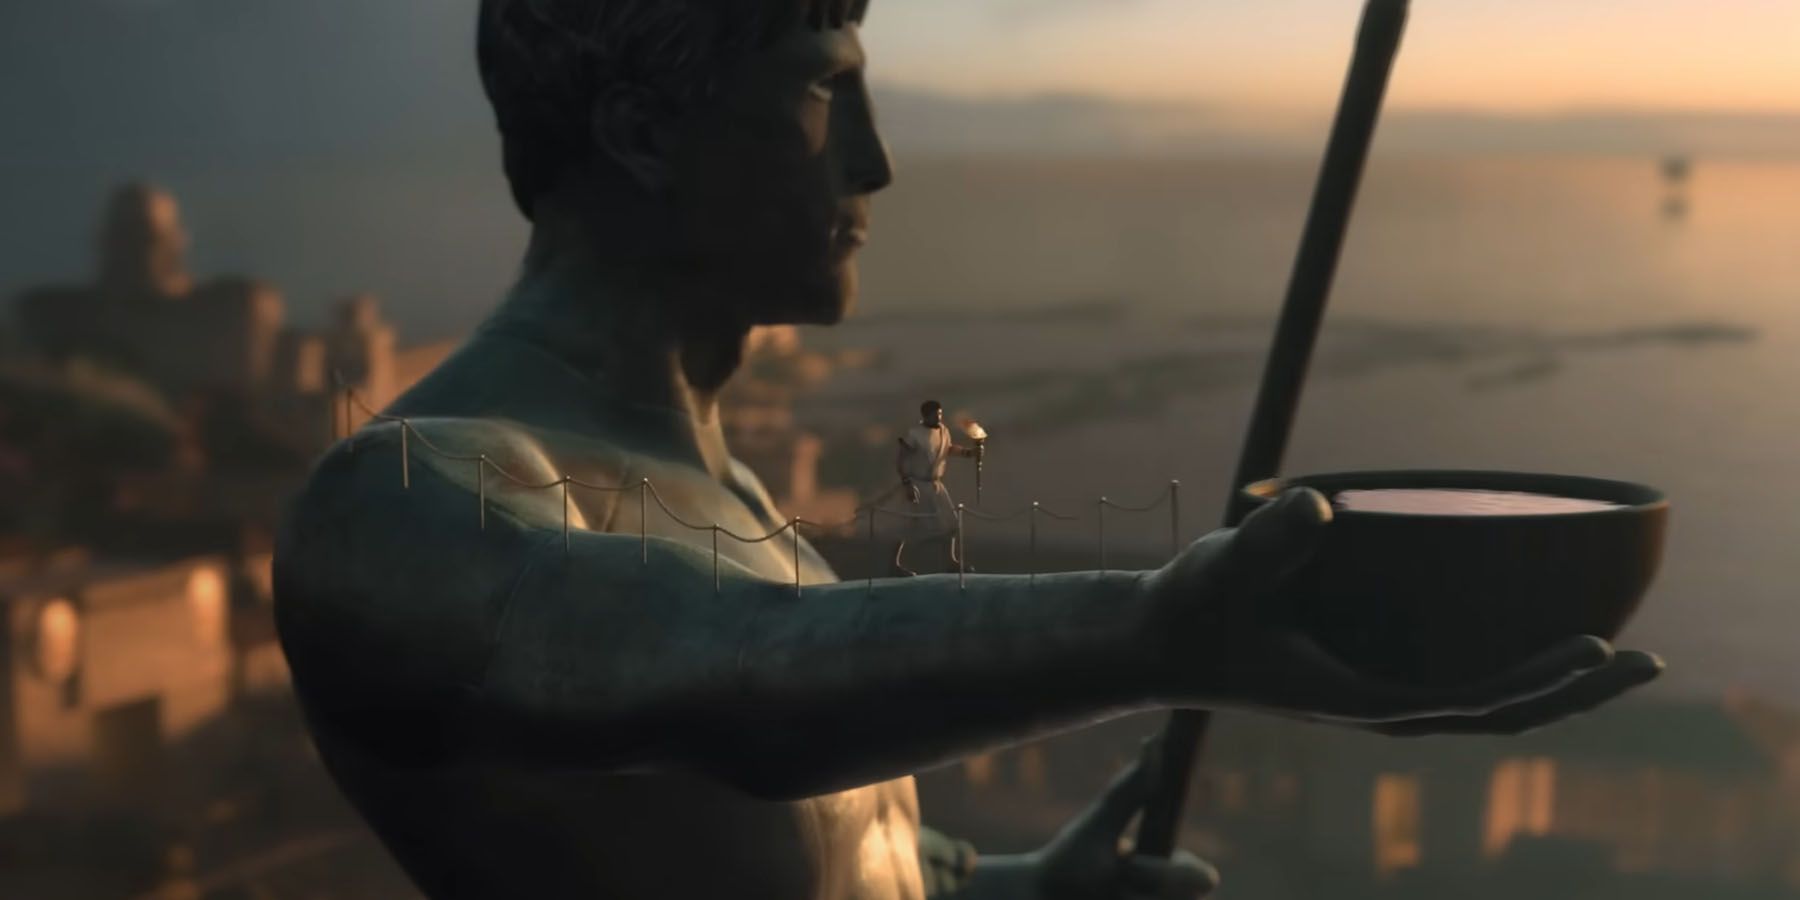 Civ 6 Trailer where one is lighting a torch for worship